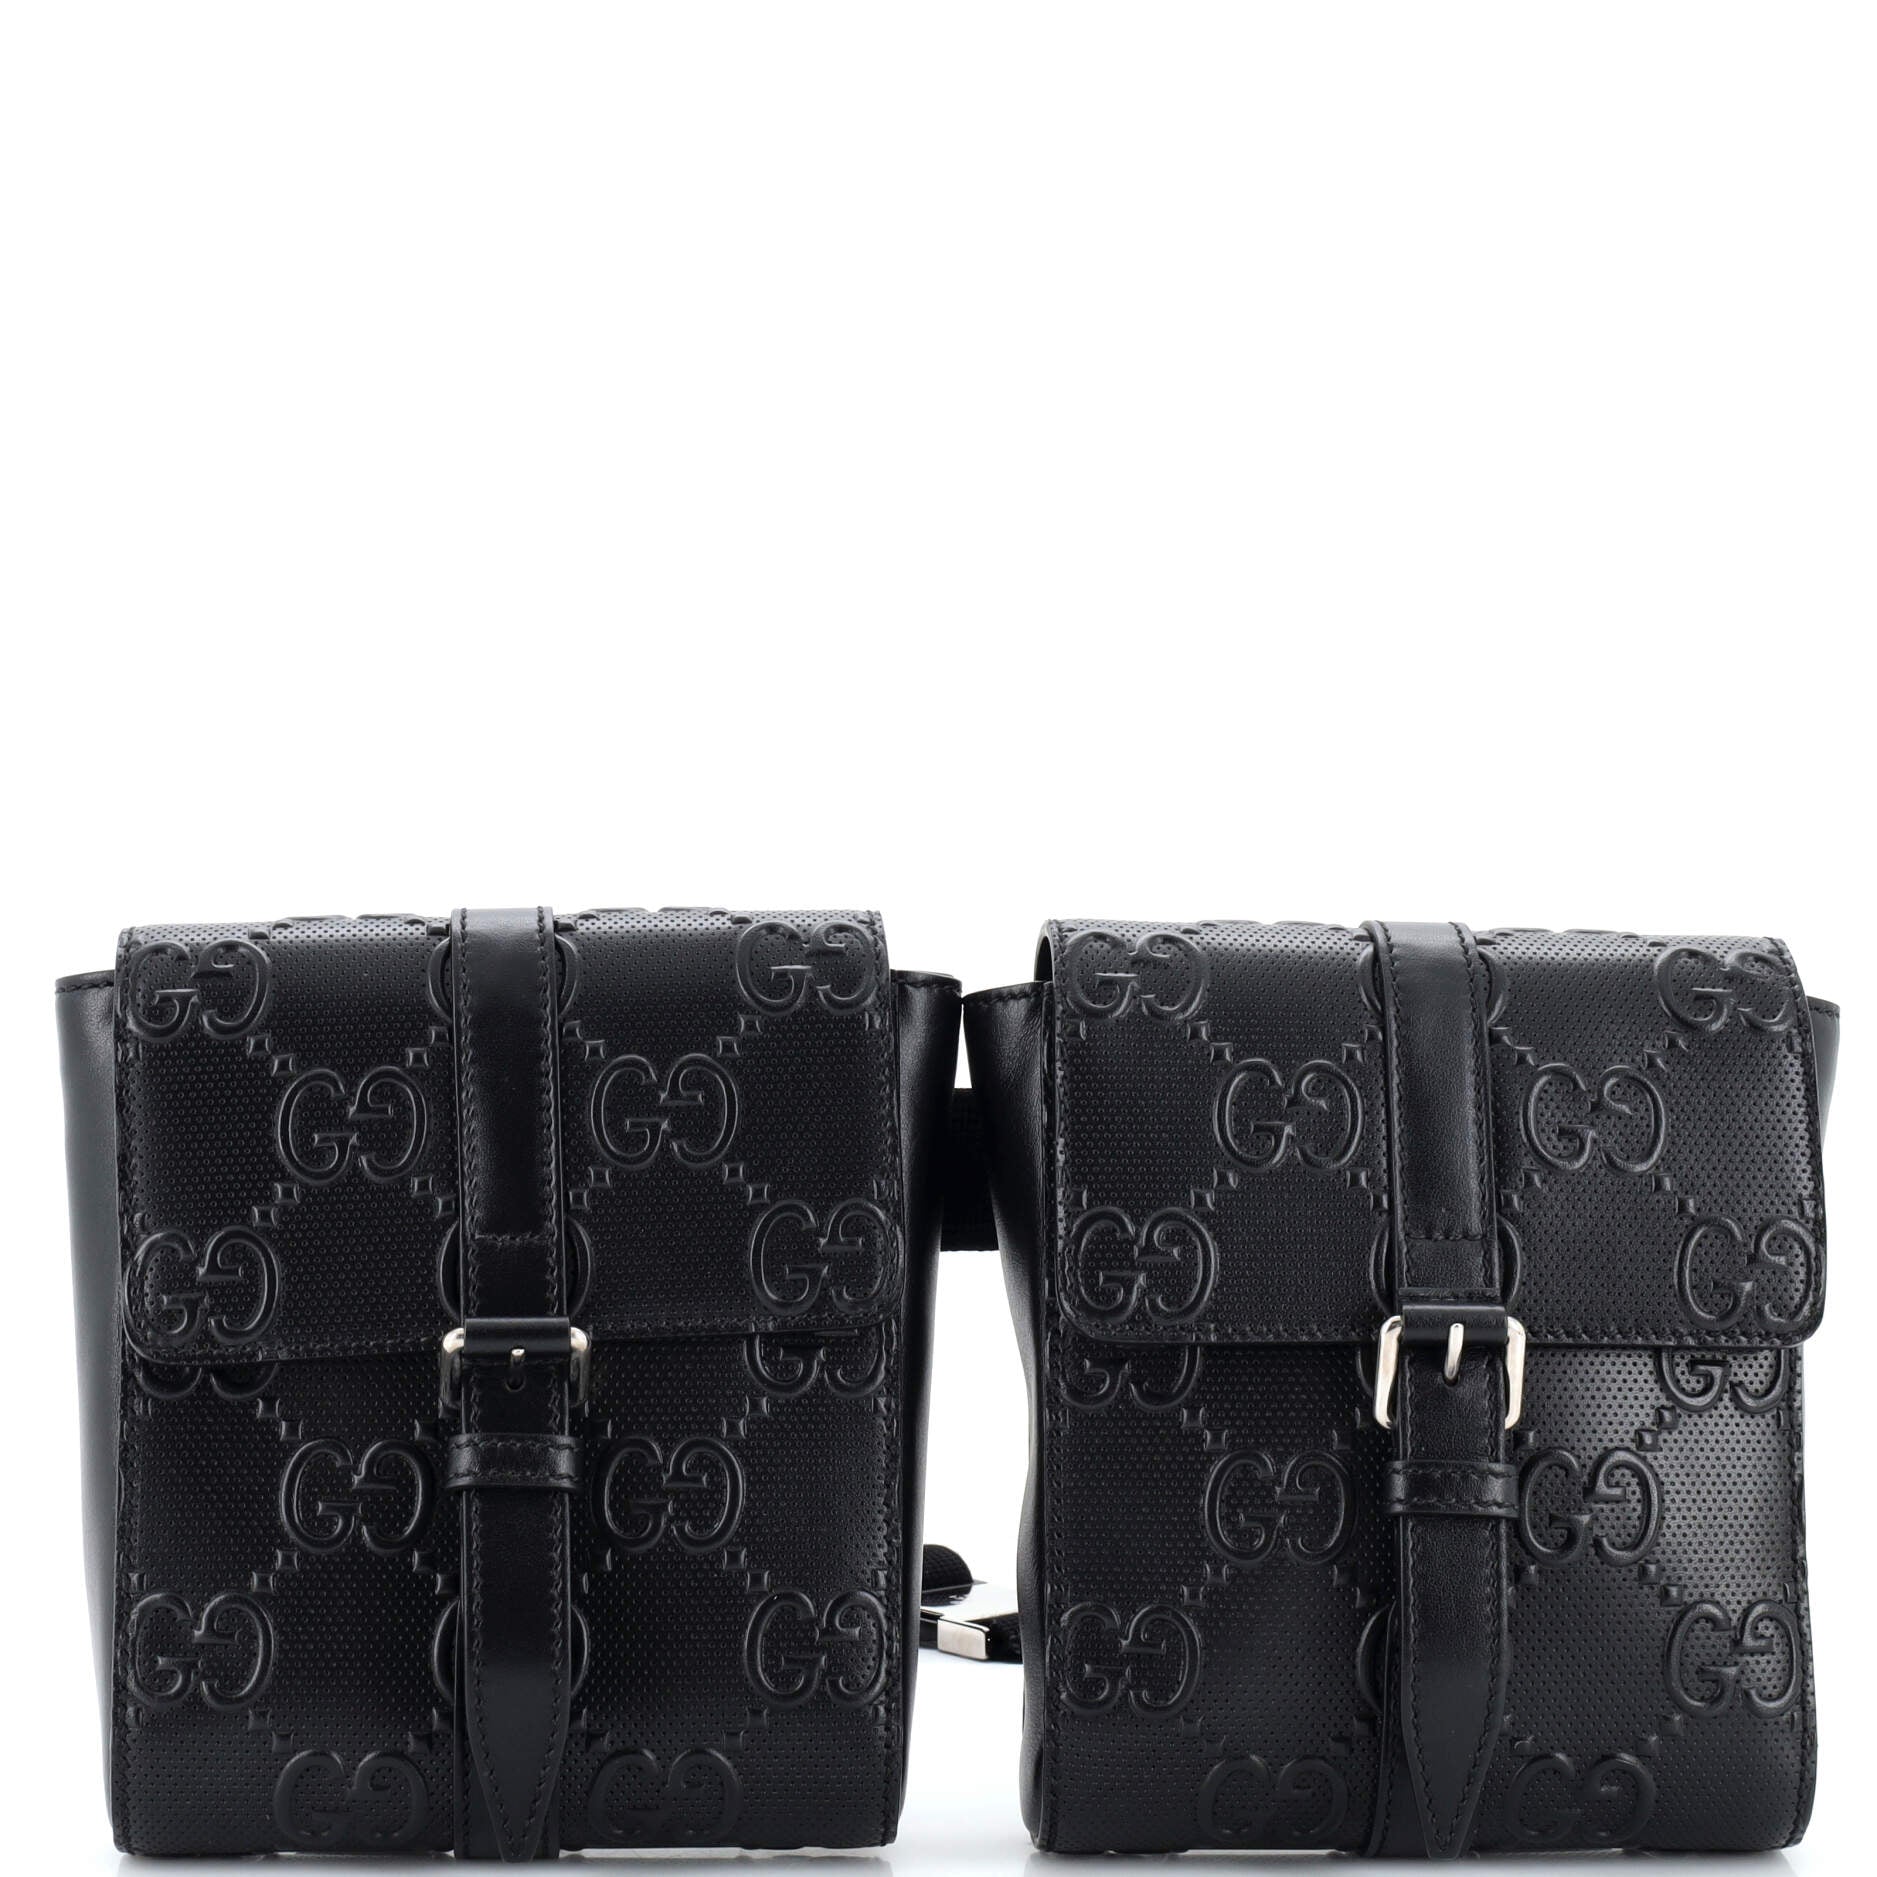 Double Belt Bag GG Embossed Perforated Leather